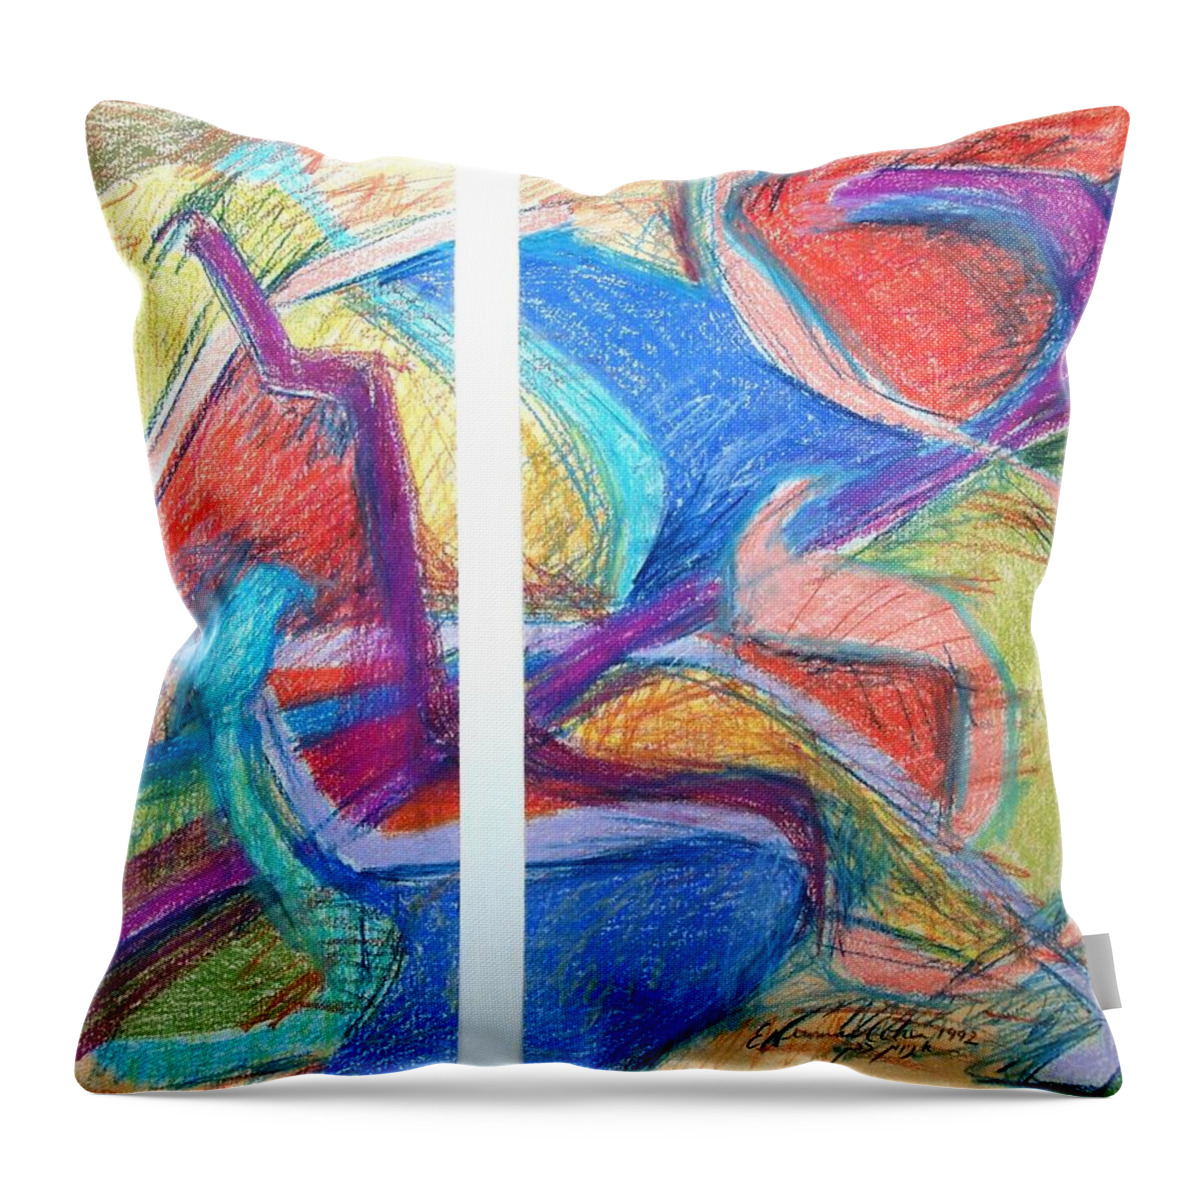 Two Panel Heat Throw Pillow featuring the drawing Two Panel Heat by Esther Newman-Cohen